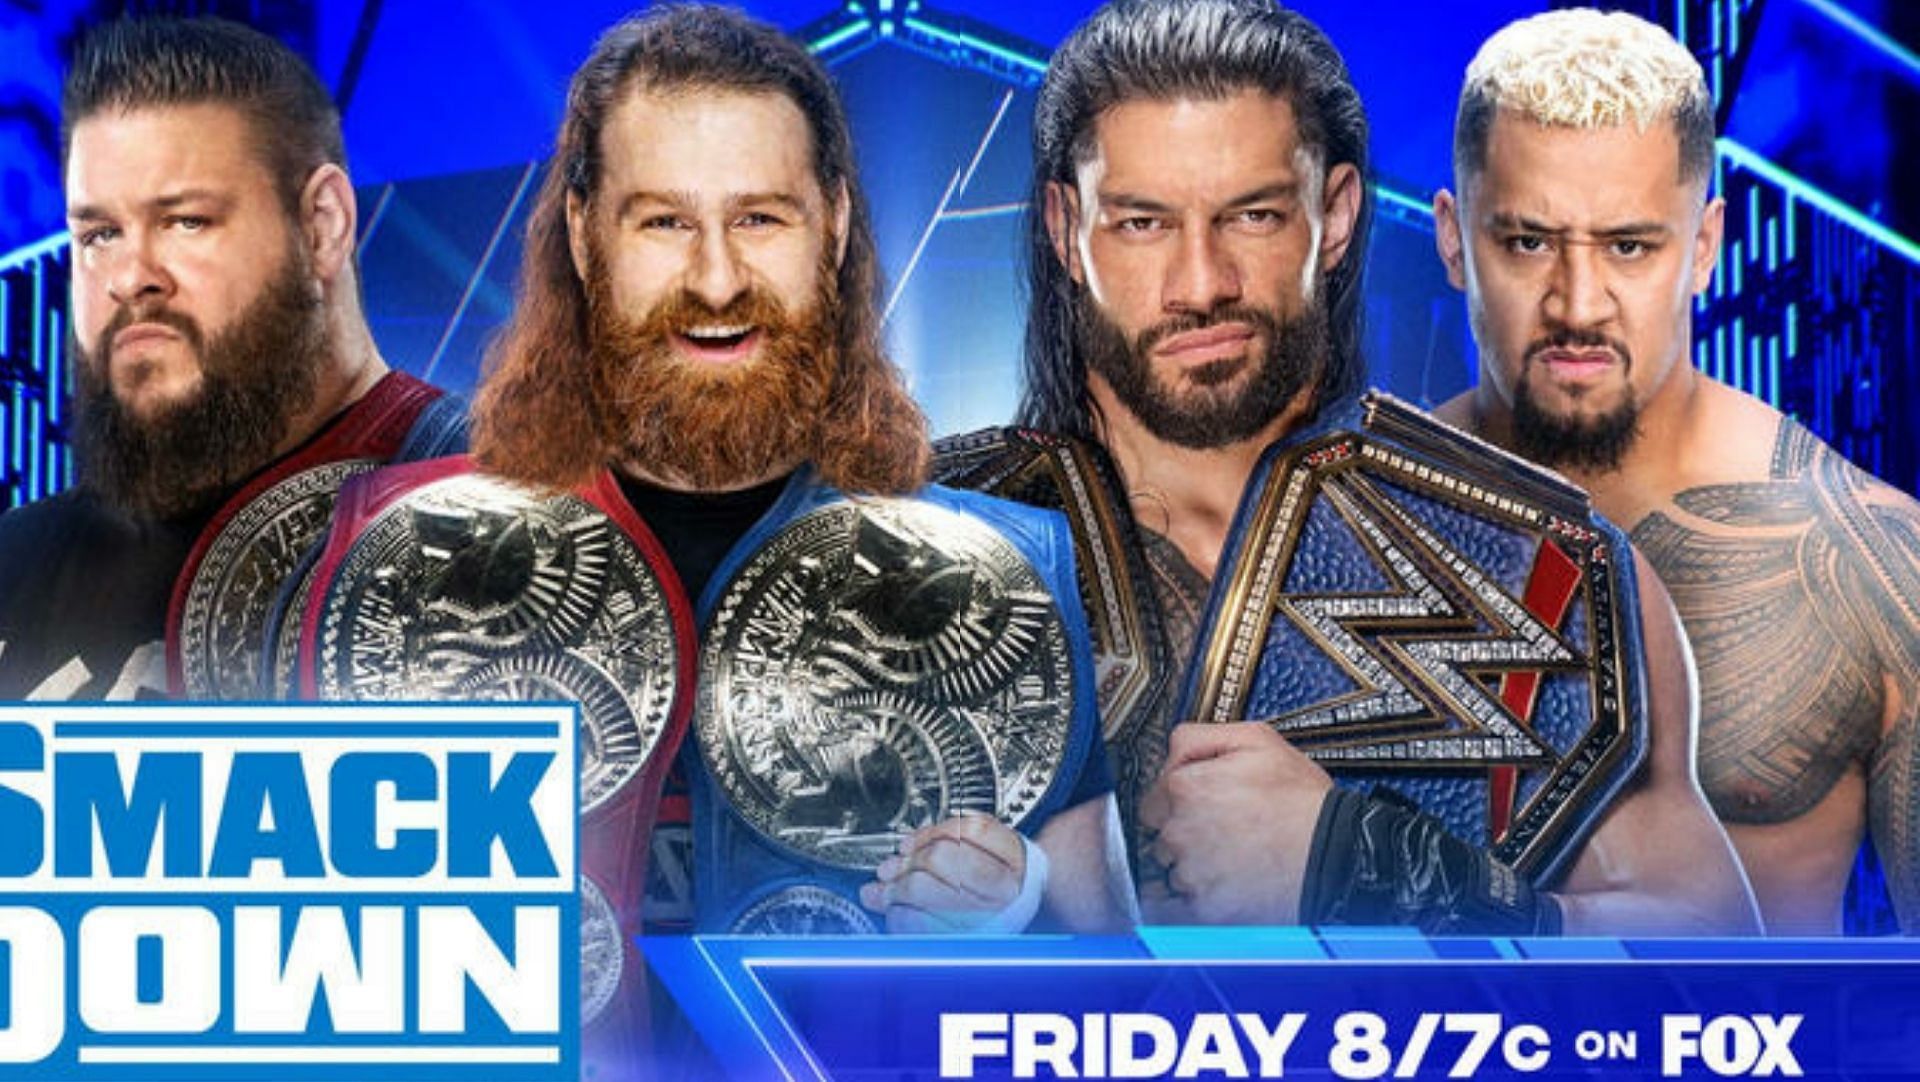 Roman Reigns and Solo Sikoa will come face-to-face with Kevin Owens and Sami Zayn tonight on WWE SmackDown.